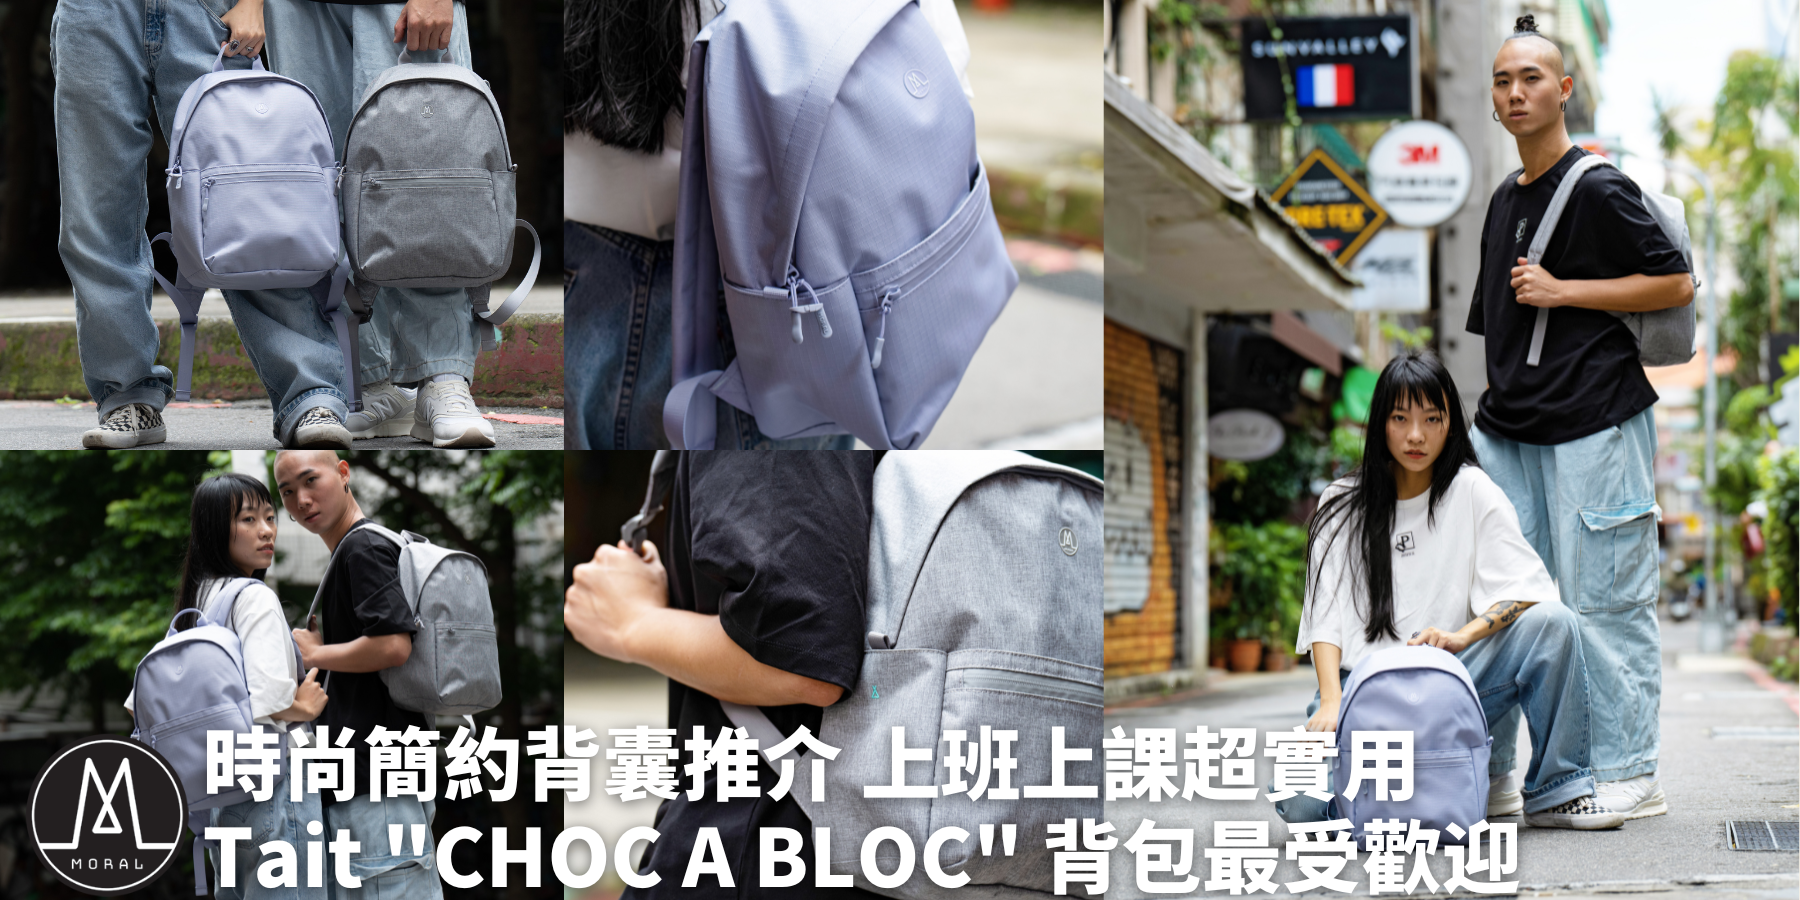 【Tait "CHOC A BLOC" Backpack】Simple, stylish backpack - super practical for school and work